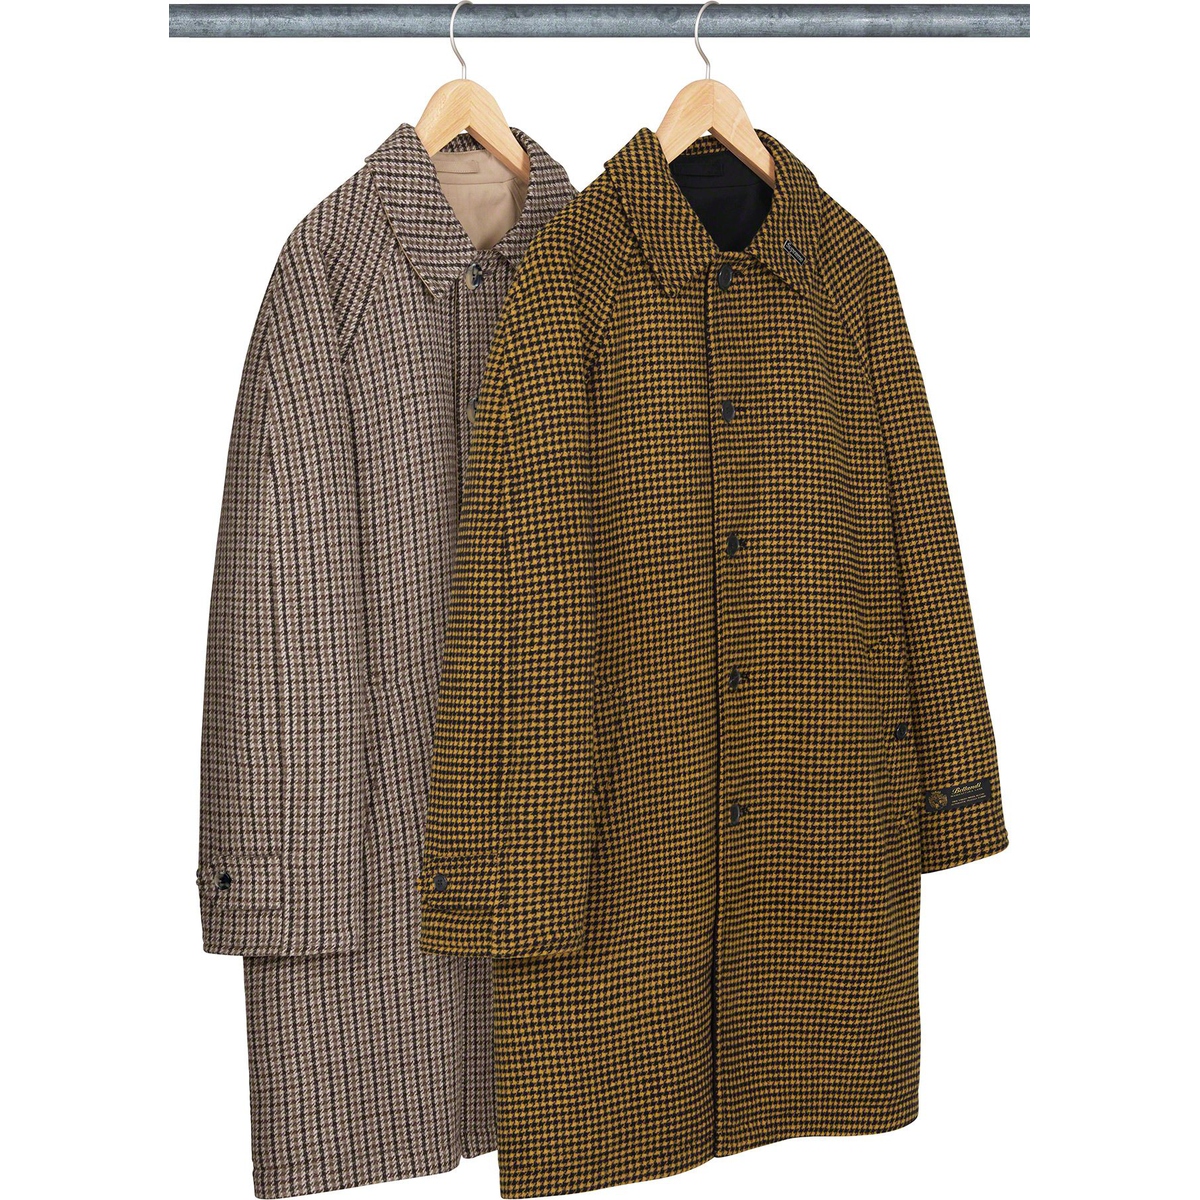 Supreme Reversible Houndstooth Overcoat released during fall winter 23 season